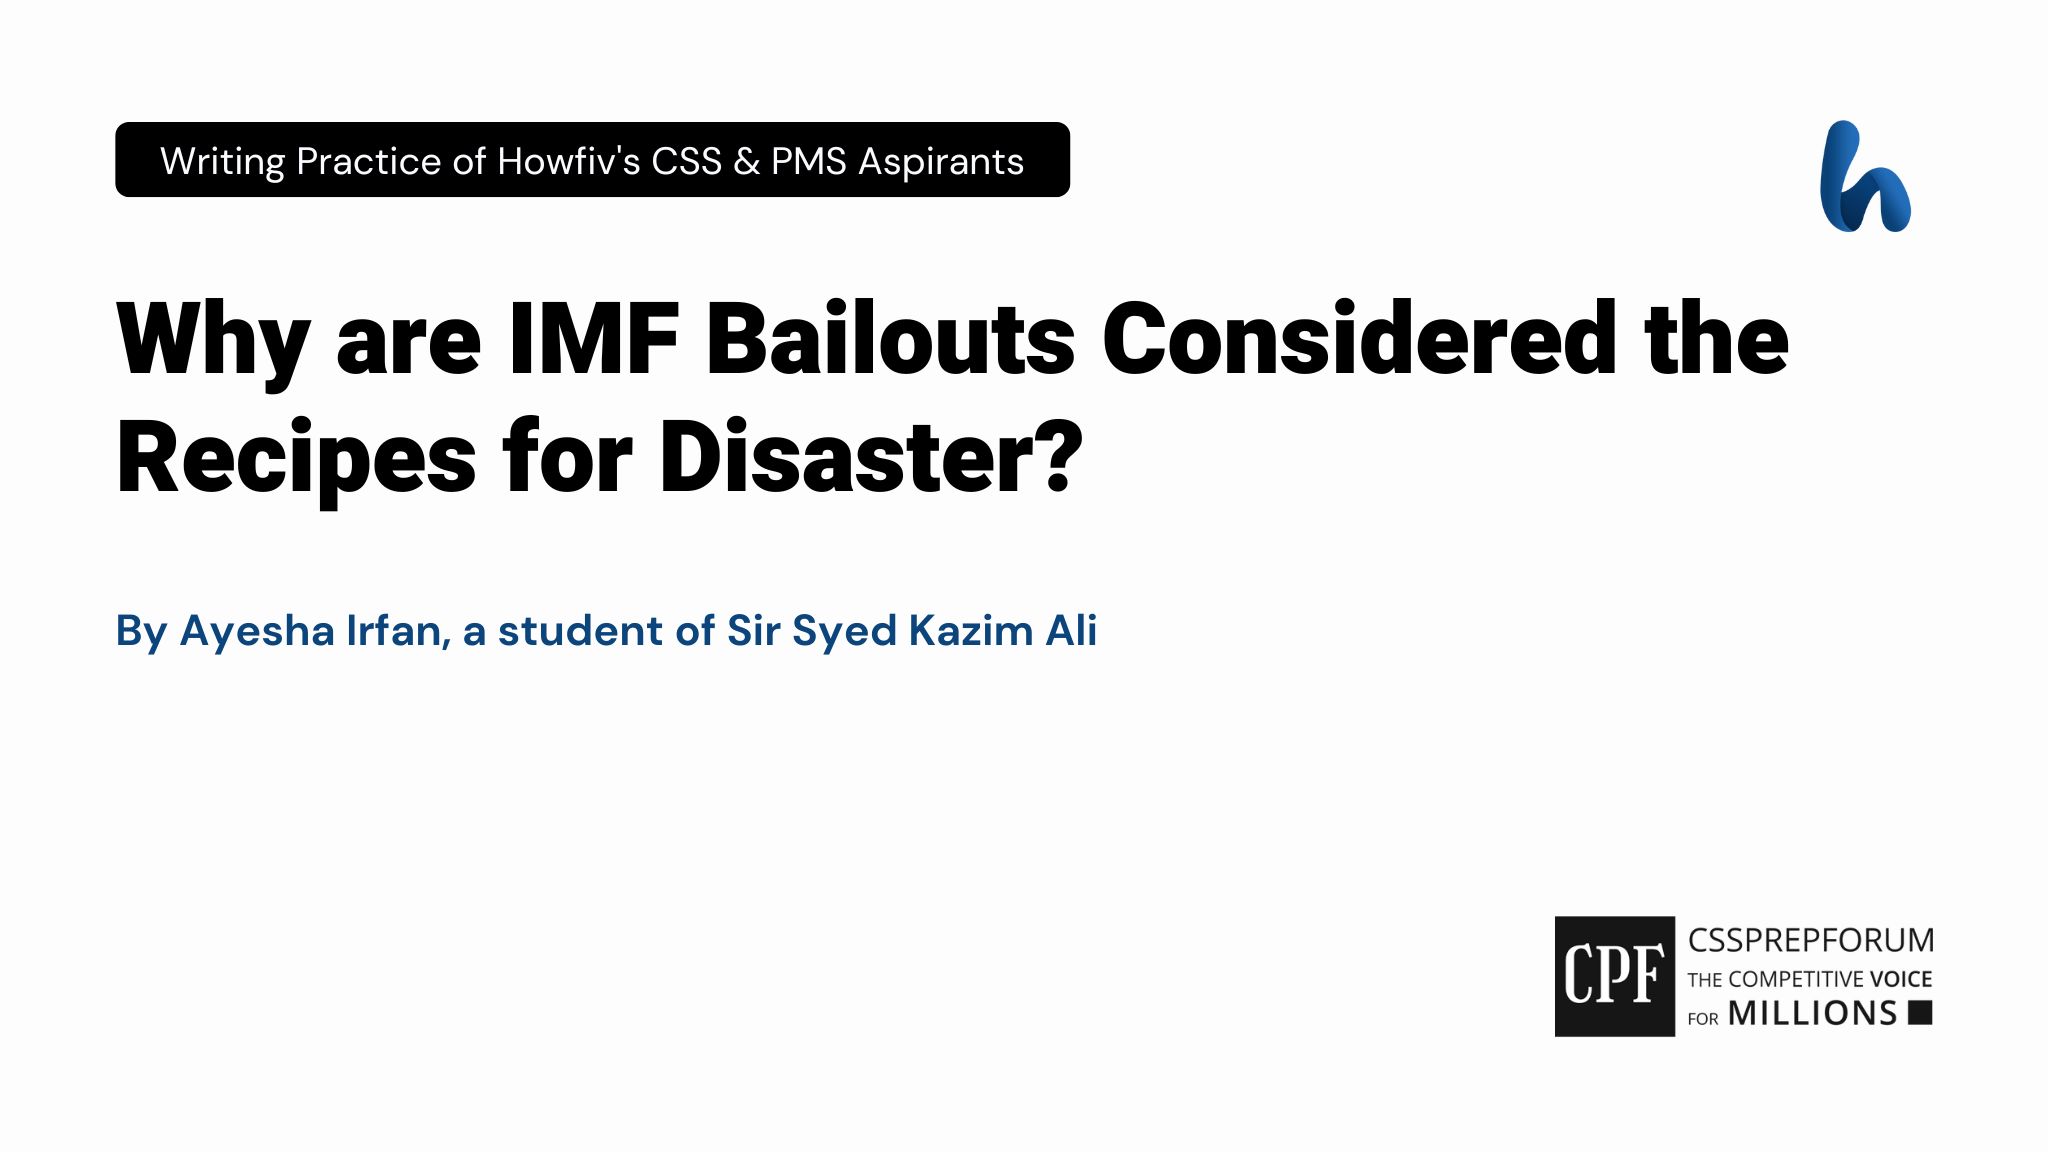 IMF Bailouts: The Recipes for Disaster by Ayesha Irfan